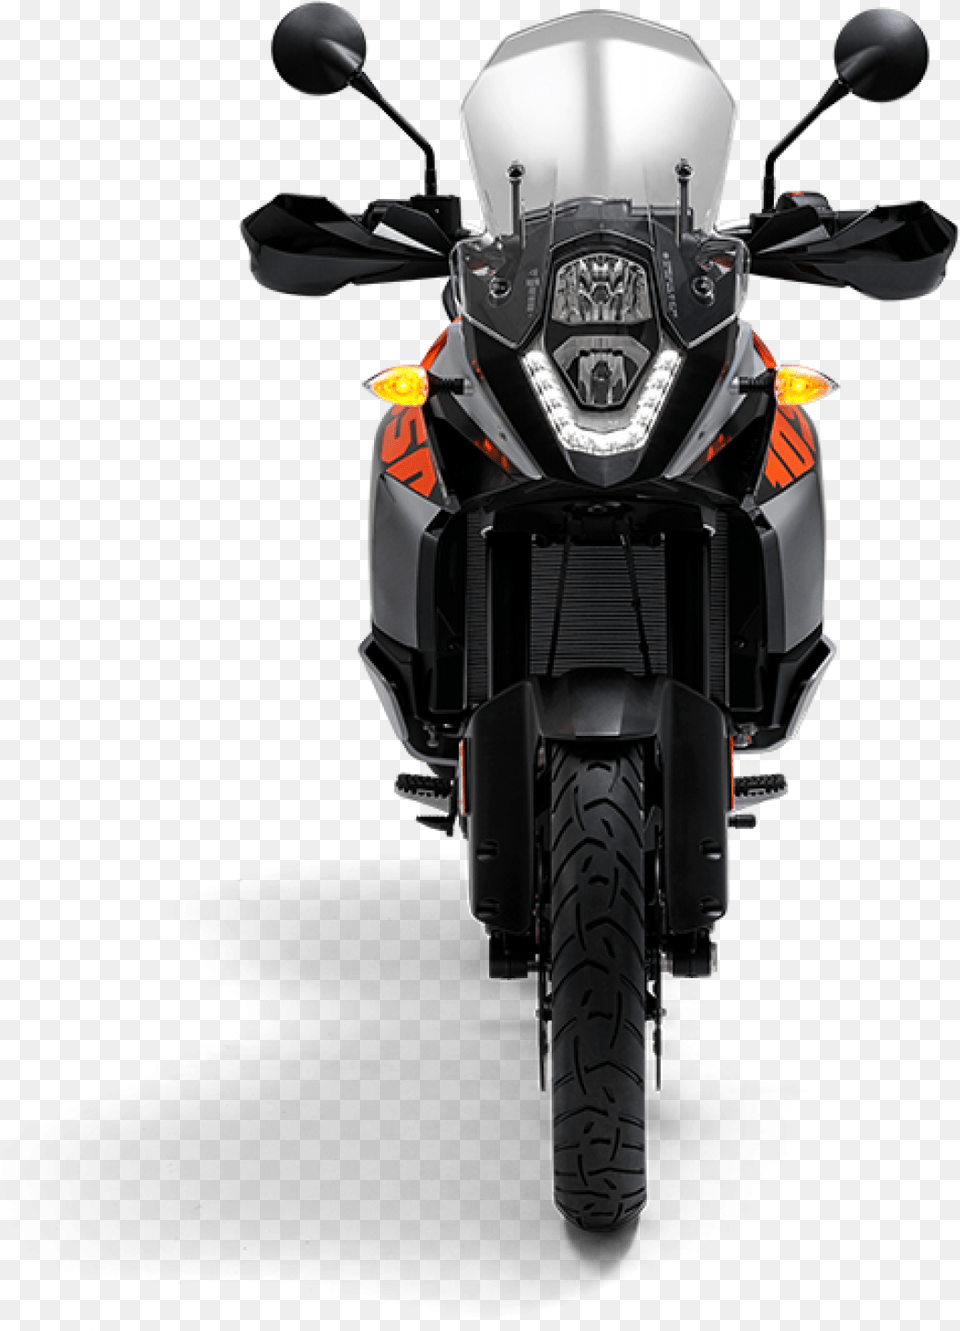 Scooter And Moped Motorcycle Rider Information And Triumph Tiger 800 Front, Transportation, Vehicle, Machine, Wheel Free Png Download